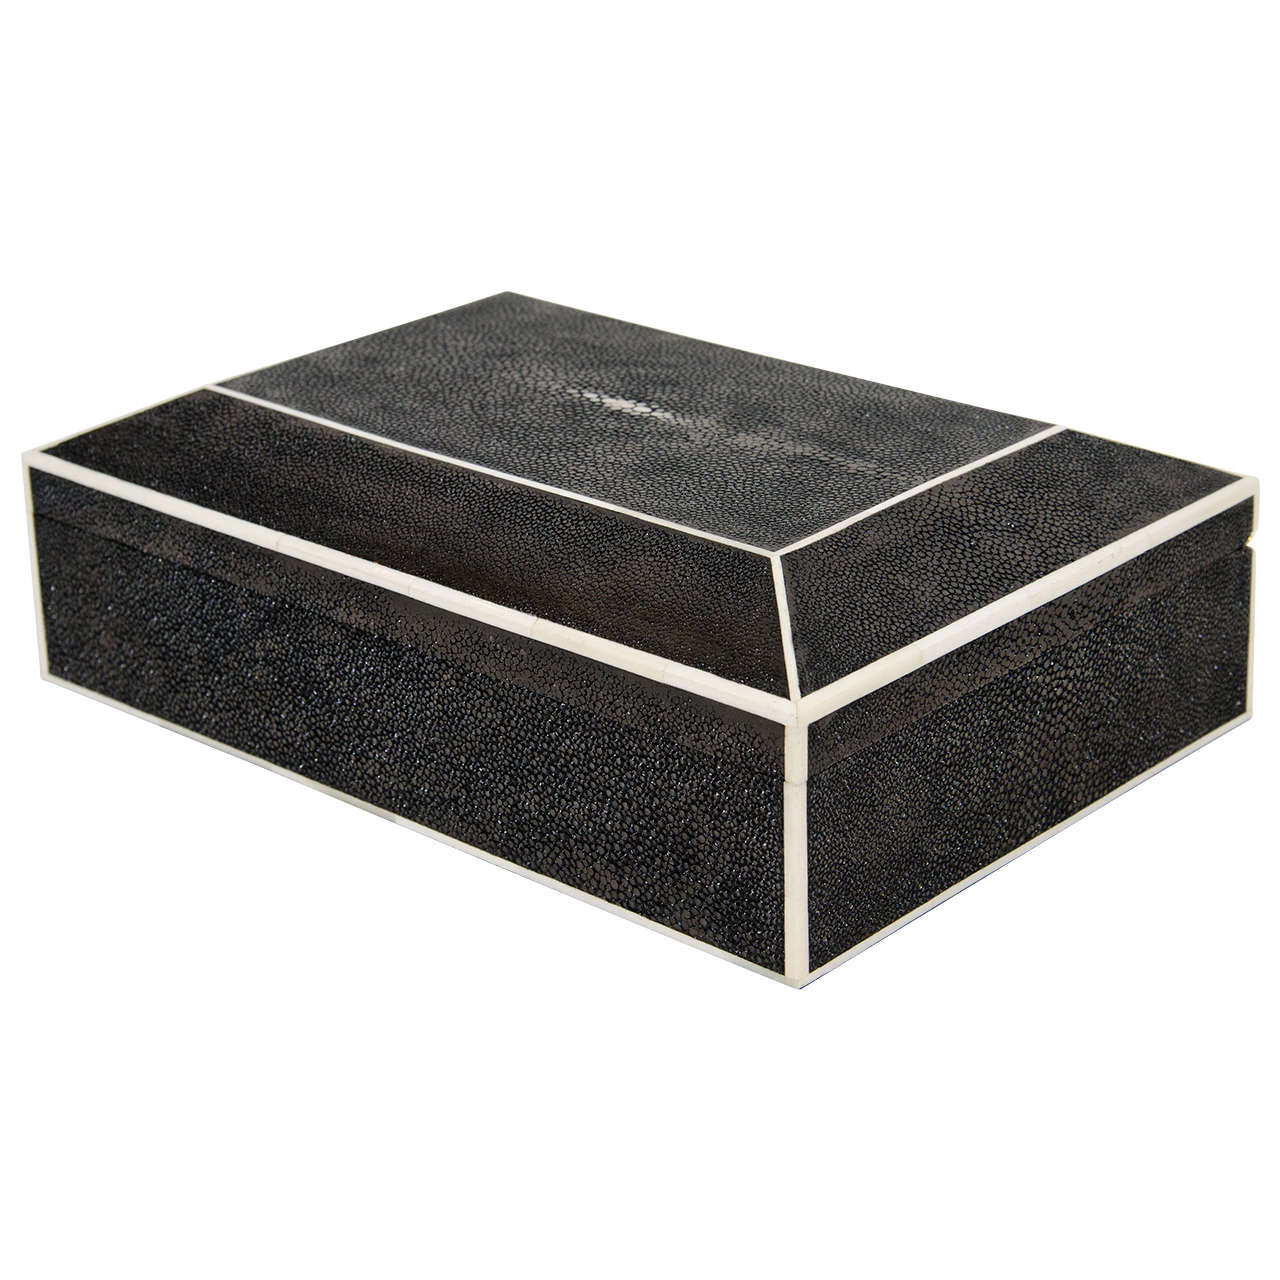 Genuine shagreen box in black with white bone trim, handcrafted wood interior, and brass hardware.